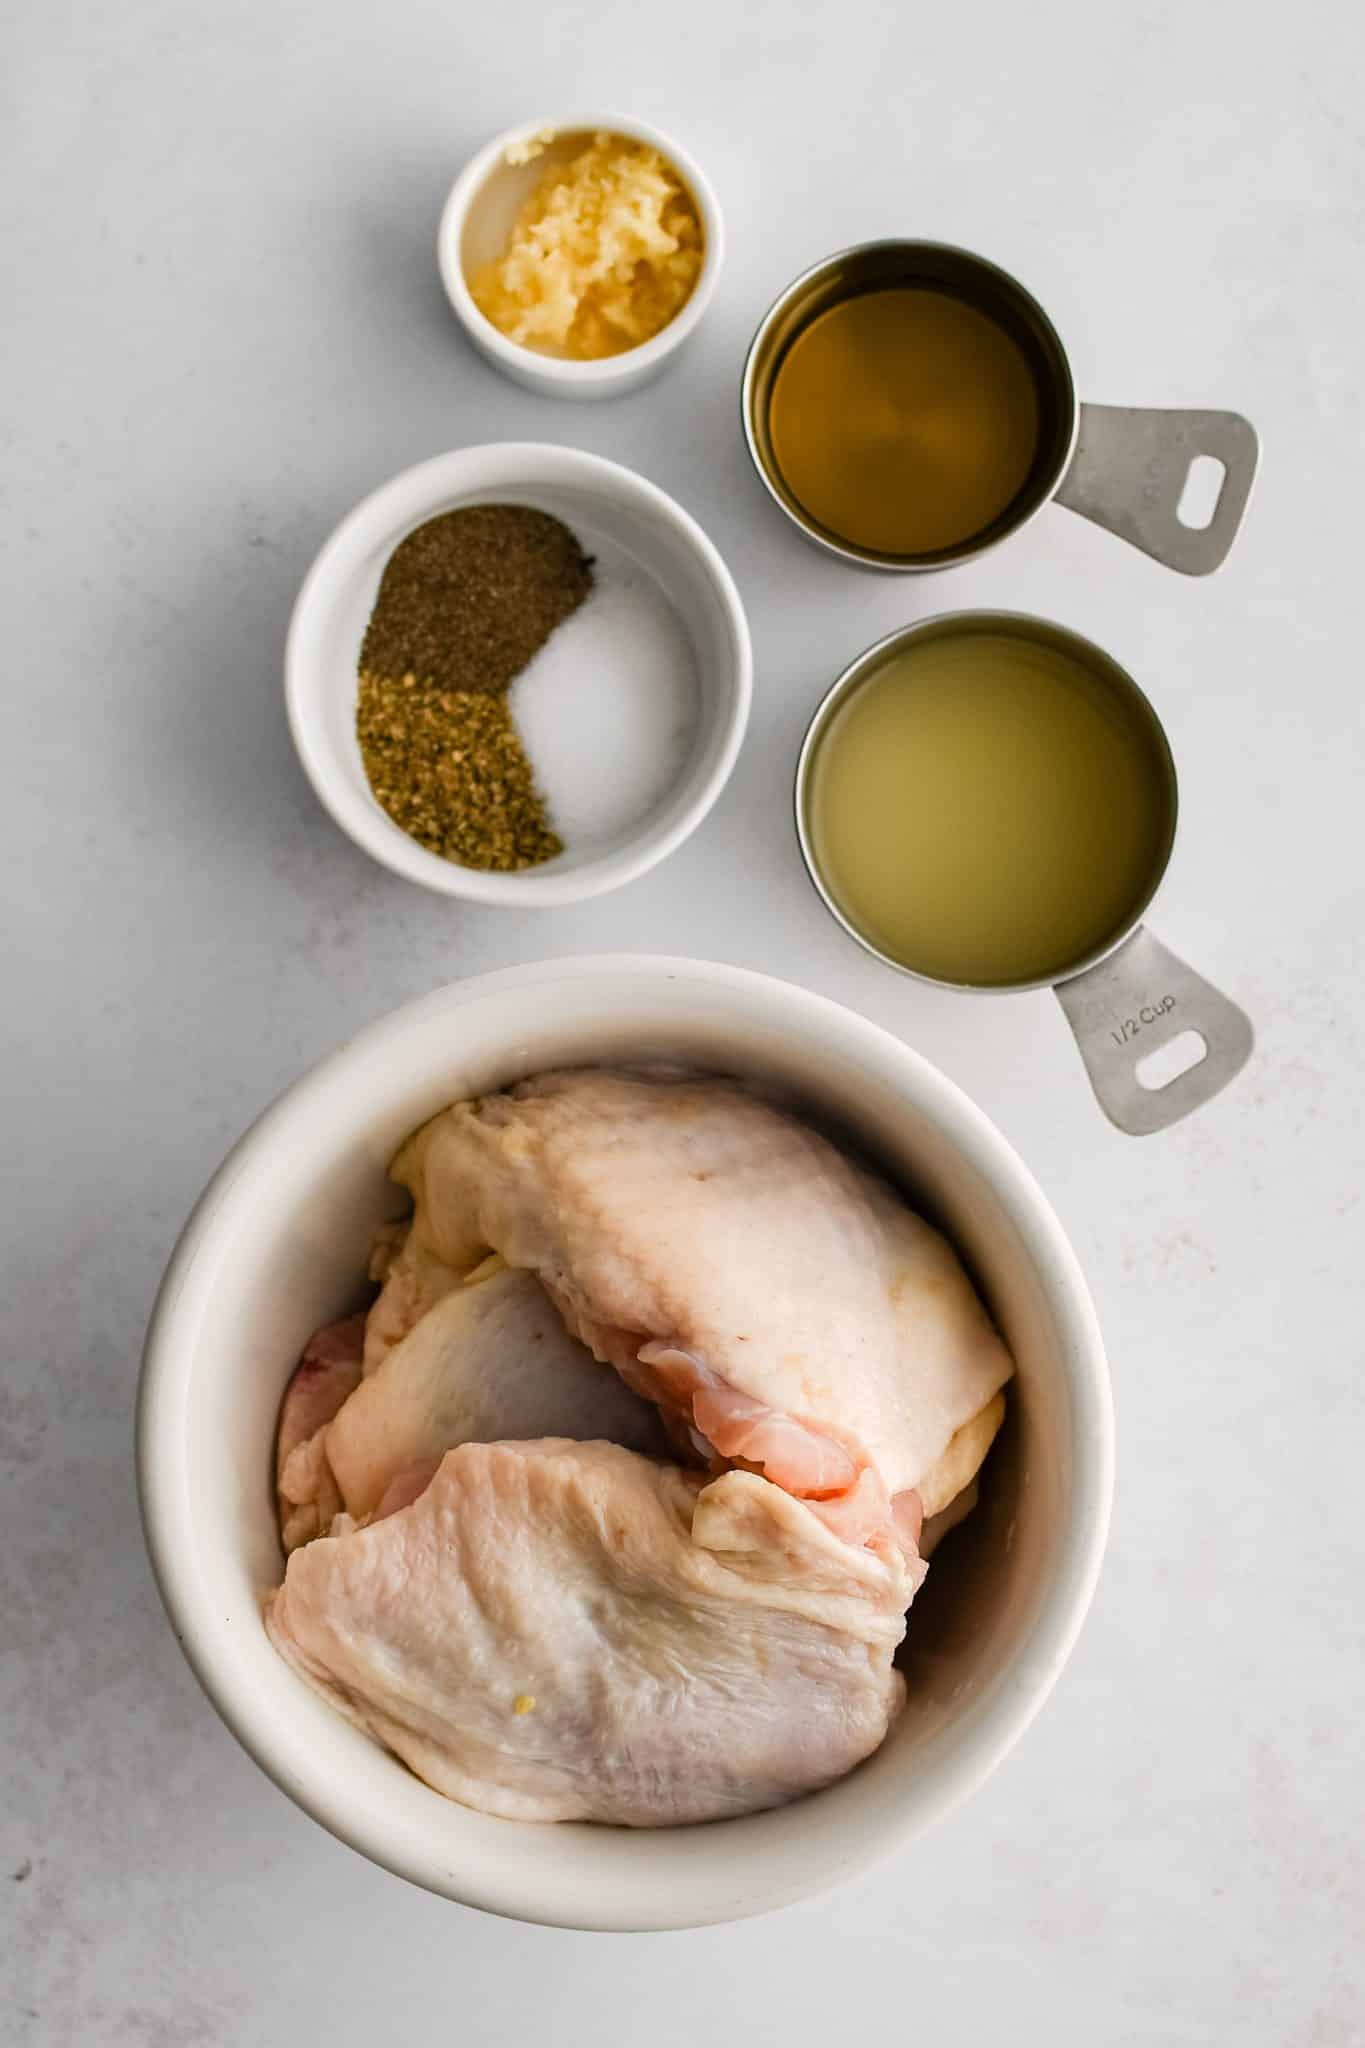 All of the ingredients for Greek lemon chicken thighs presented in individual measuring cups and ramekins.